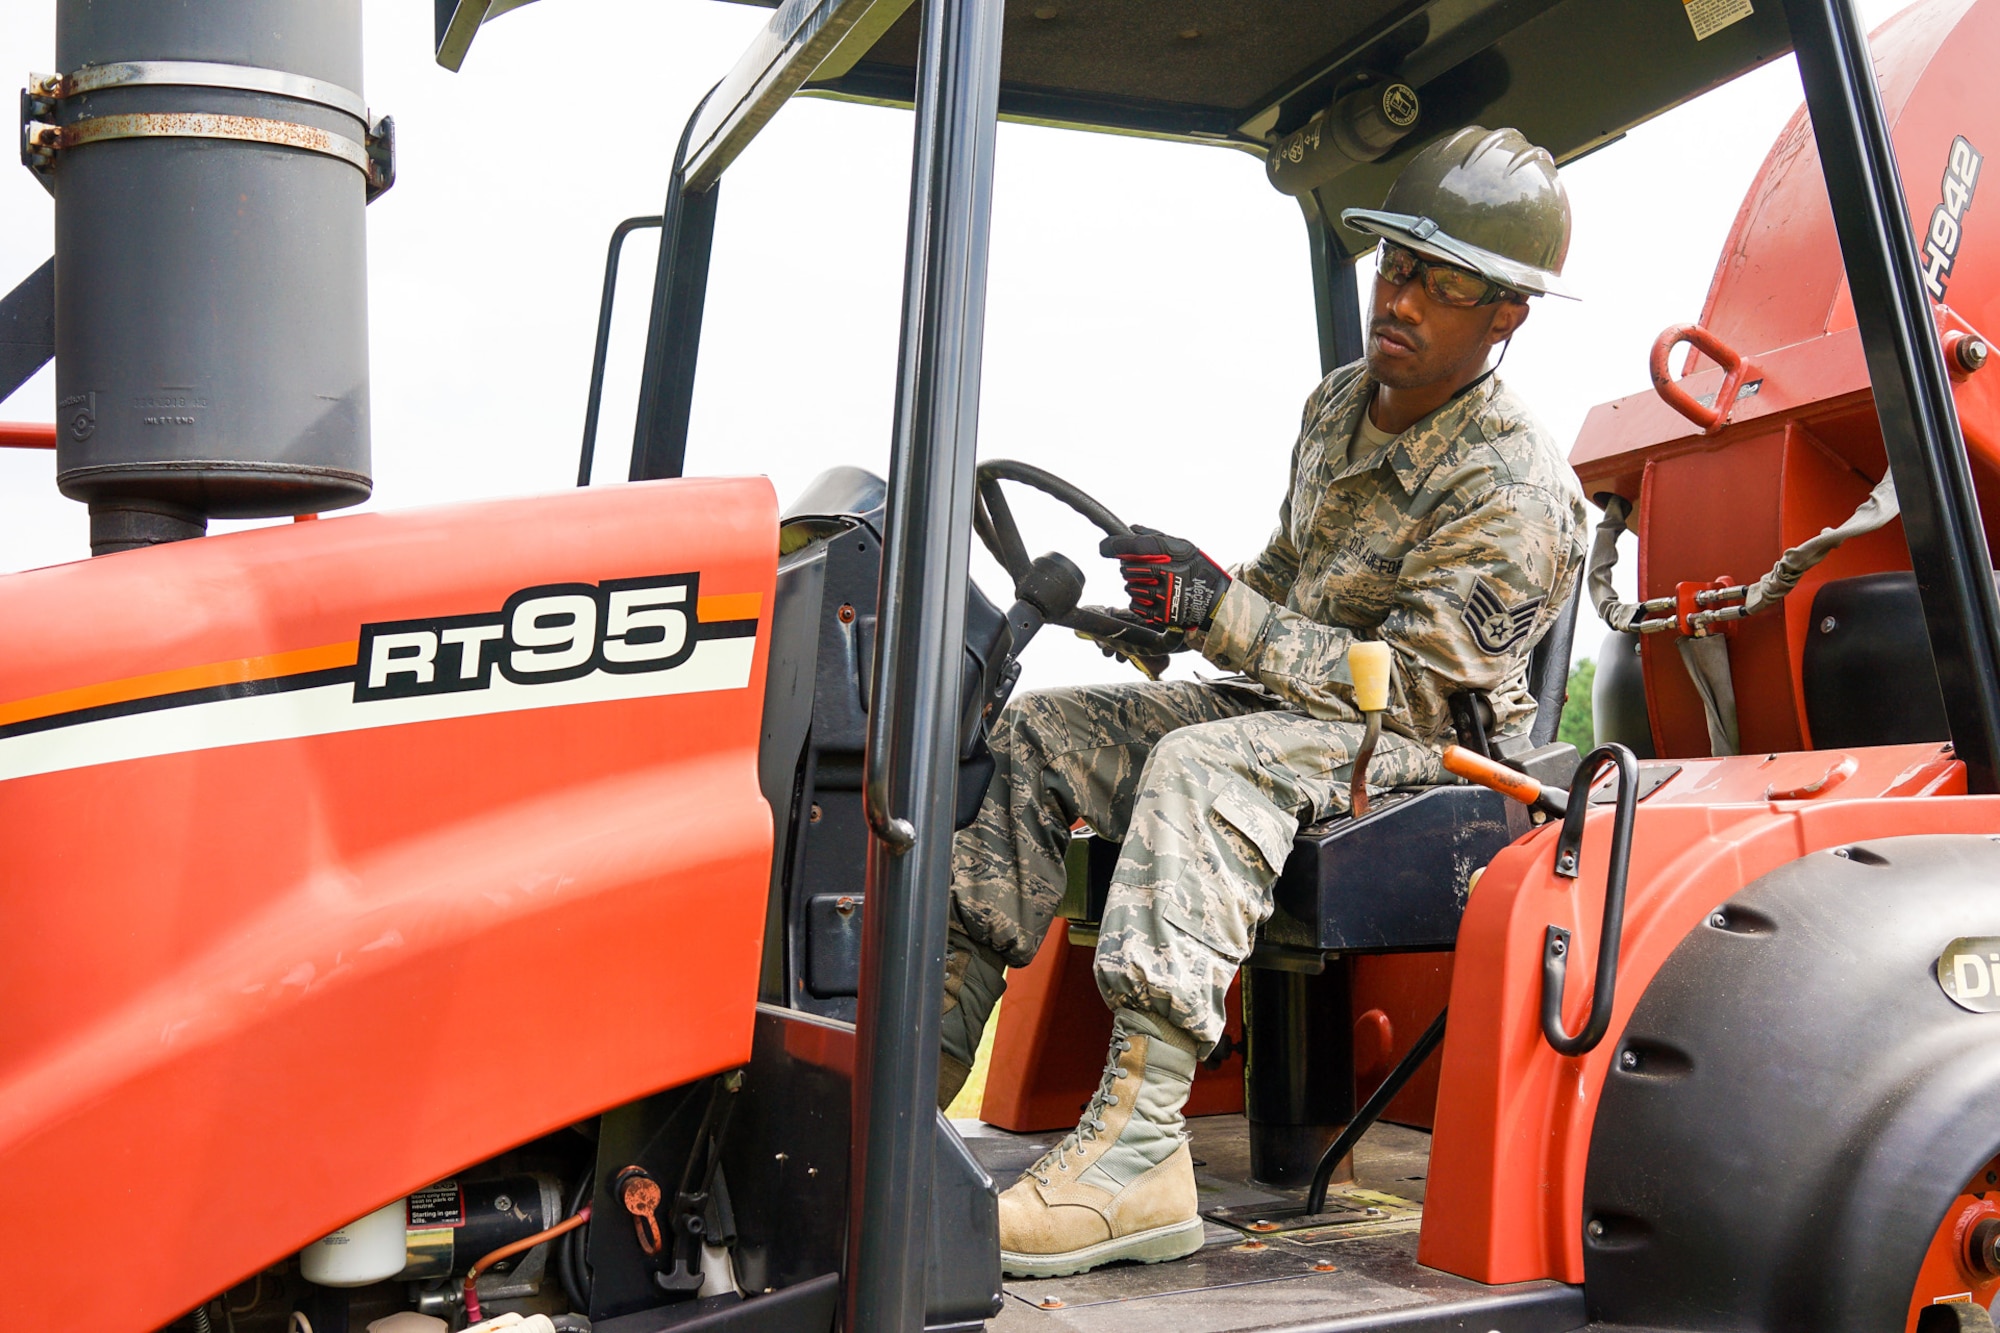 U.S. Air Force Staff Sgt. Joseph Jones, a cable and antenna systems specialist with the 202nd Engineering Installation Squadron (EIS), Georgia Air National Guard, views the progress of a trench he is digging using a trencher with a backhoe attachment during a weeklong training exercise at Robins Air Force Base, Ga., June 11, 2015. More than 80 Airmen were certified in career-field tasks crucial to the unit’s deployed and homeland missions. The 202nd EIS supports the 116th Air Control Wing and is responsible for the fixed-communications infrastructures for 27 other locations, including the 165th Airlift Wing in Savannah, Georgia, and Air National Guard units in Puerto Rico and the U.S. Virgin Islands. (U.S. Air National Guard photo by Senior Master Sgt. Roger Parsons/Released)